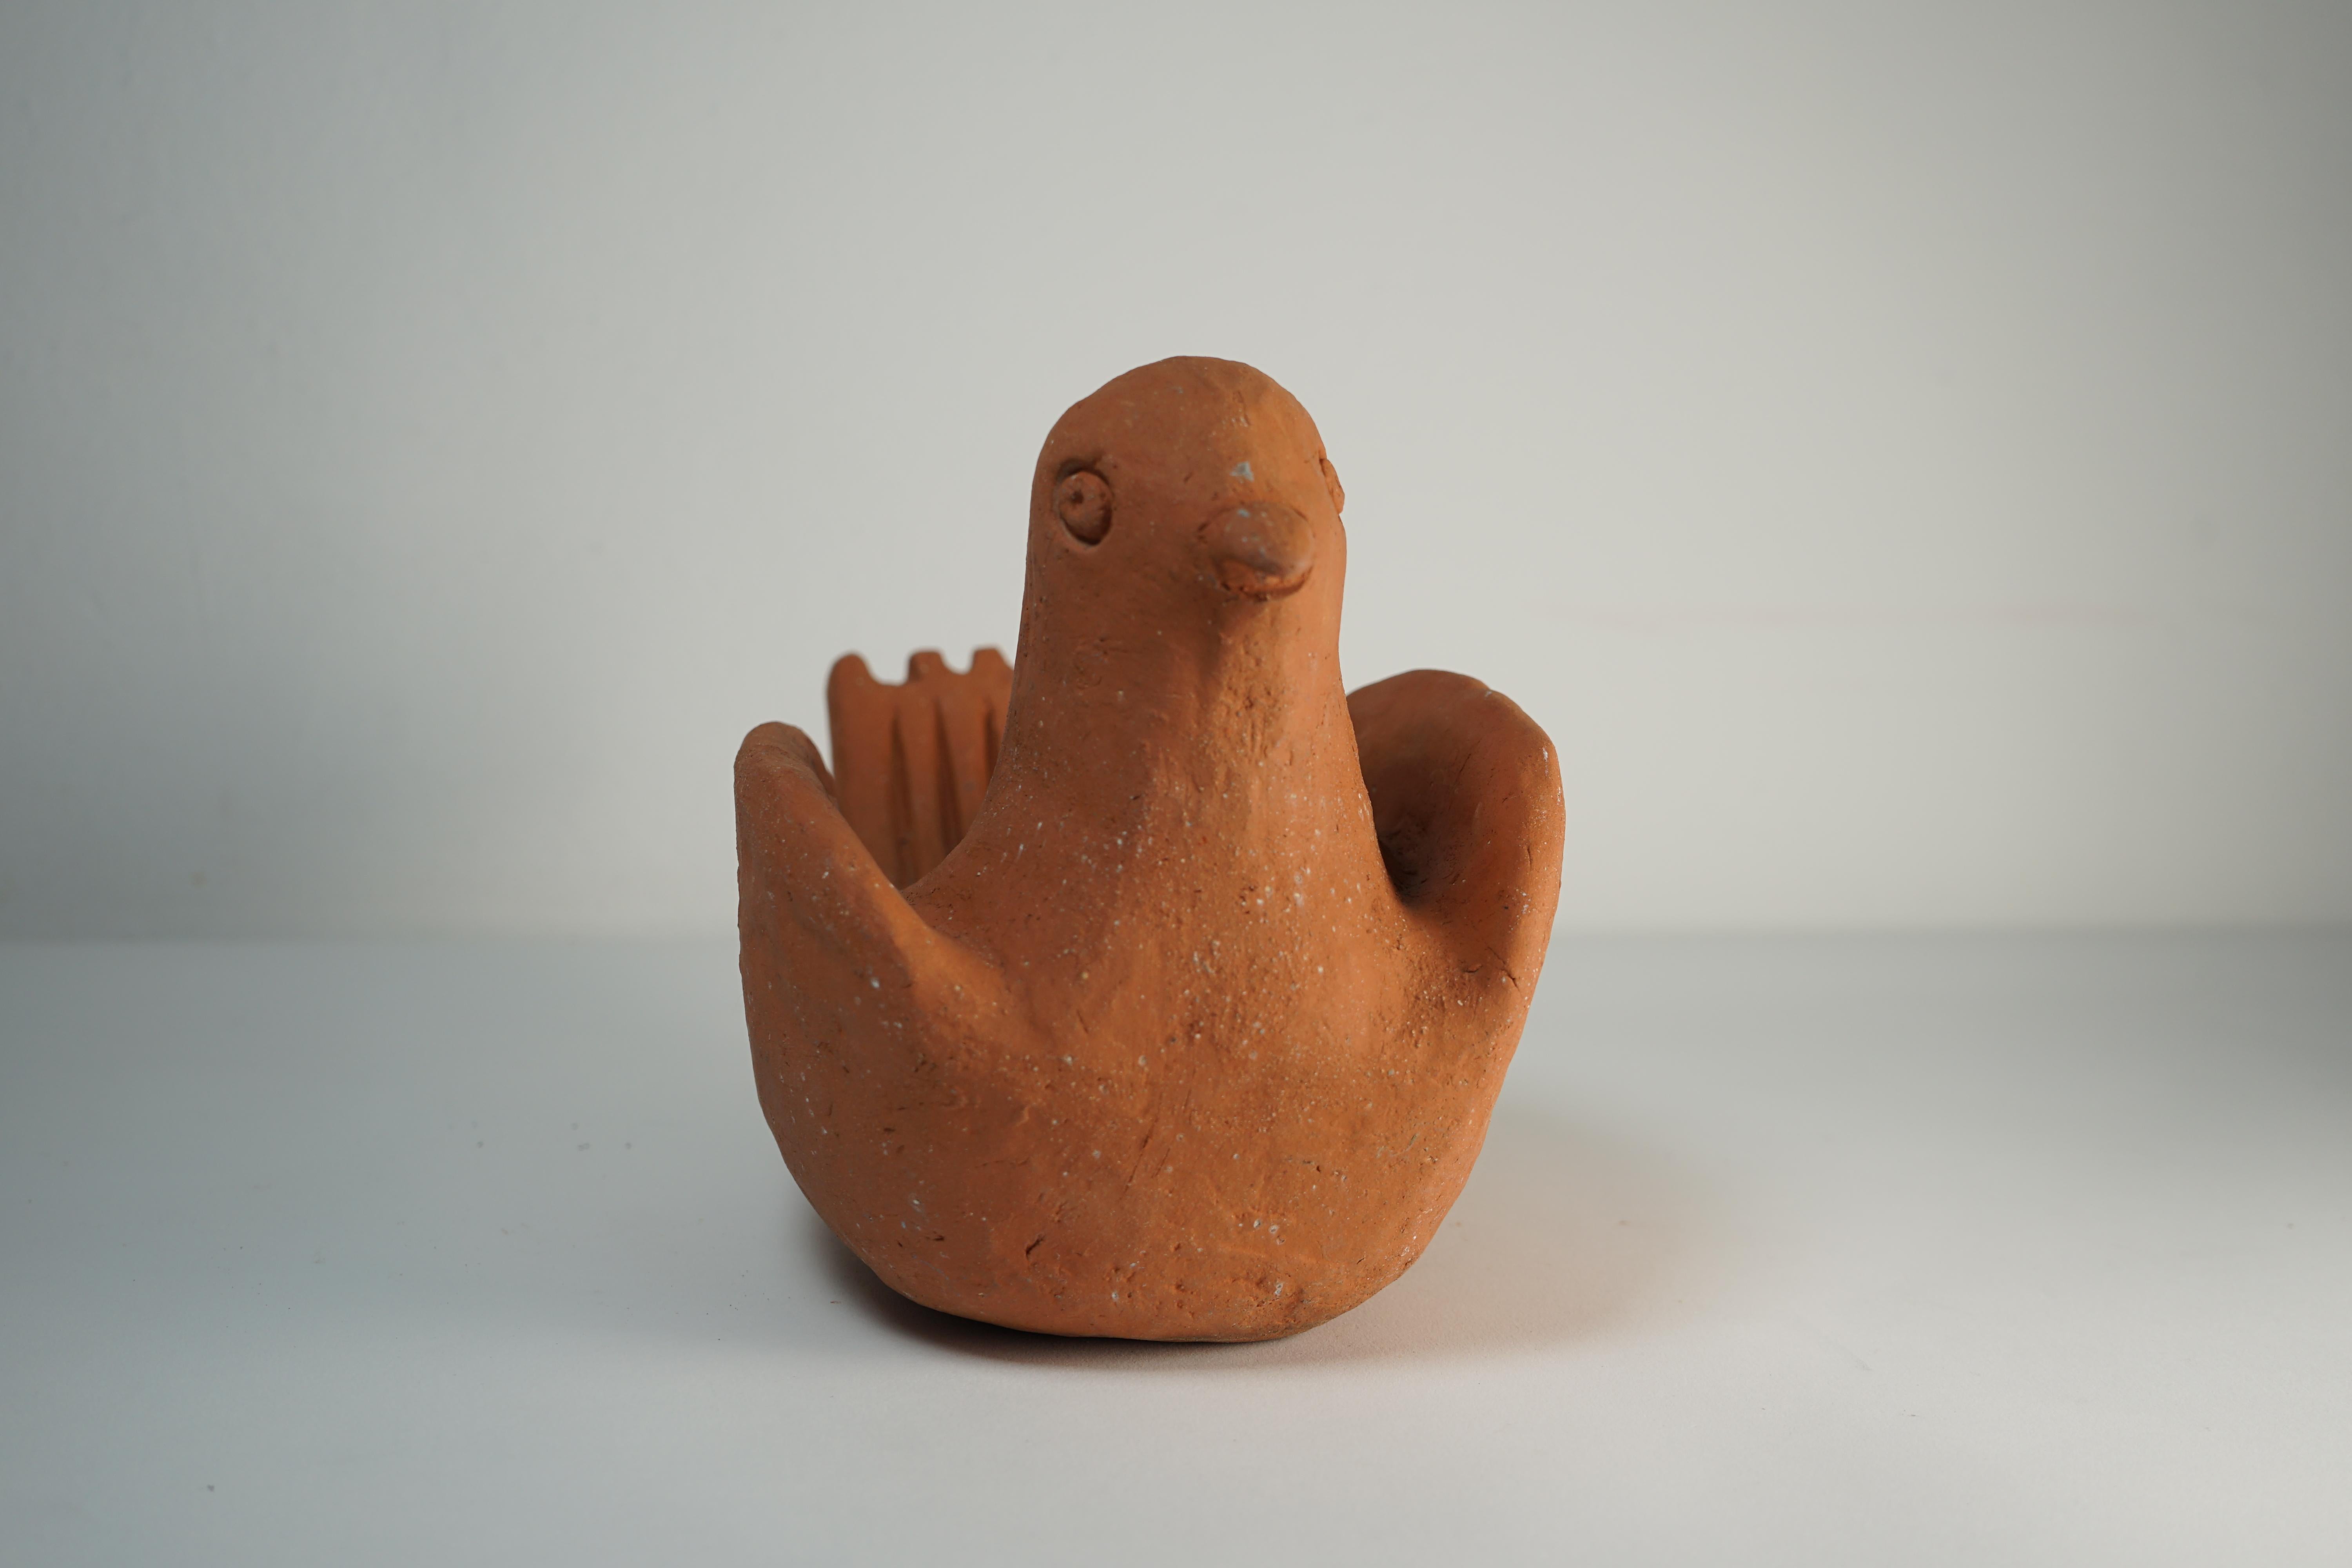 Late 20th Century Ceramic Sculpture Dove Model by Nathalie Du Pasquier for Alessio Sarri Editions For Sale